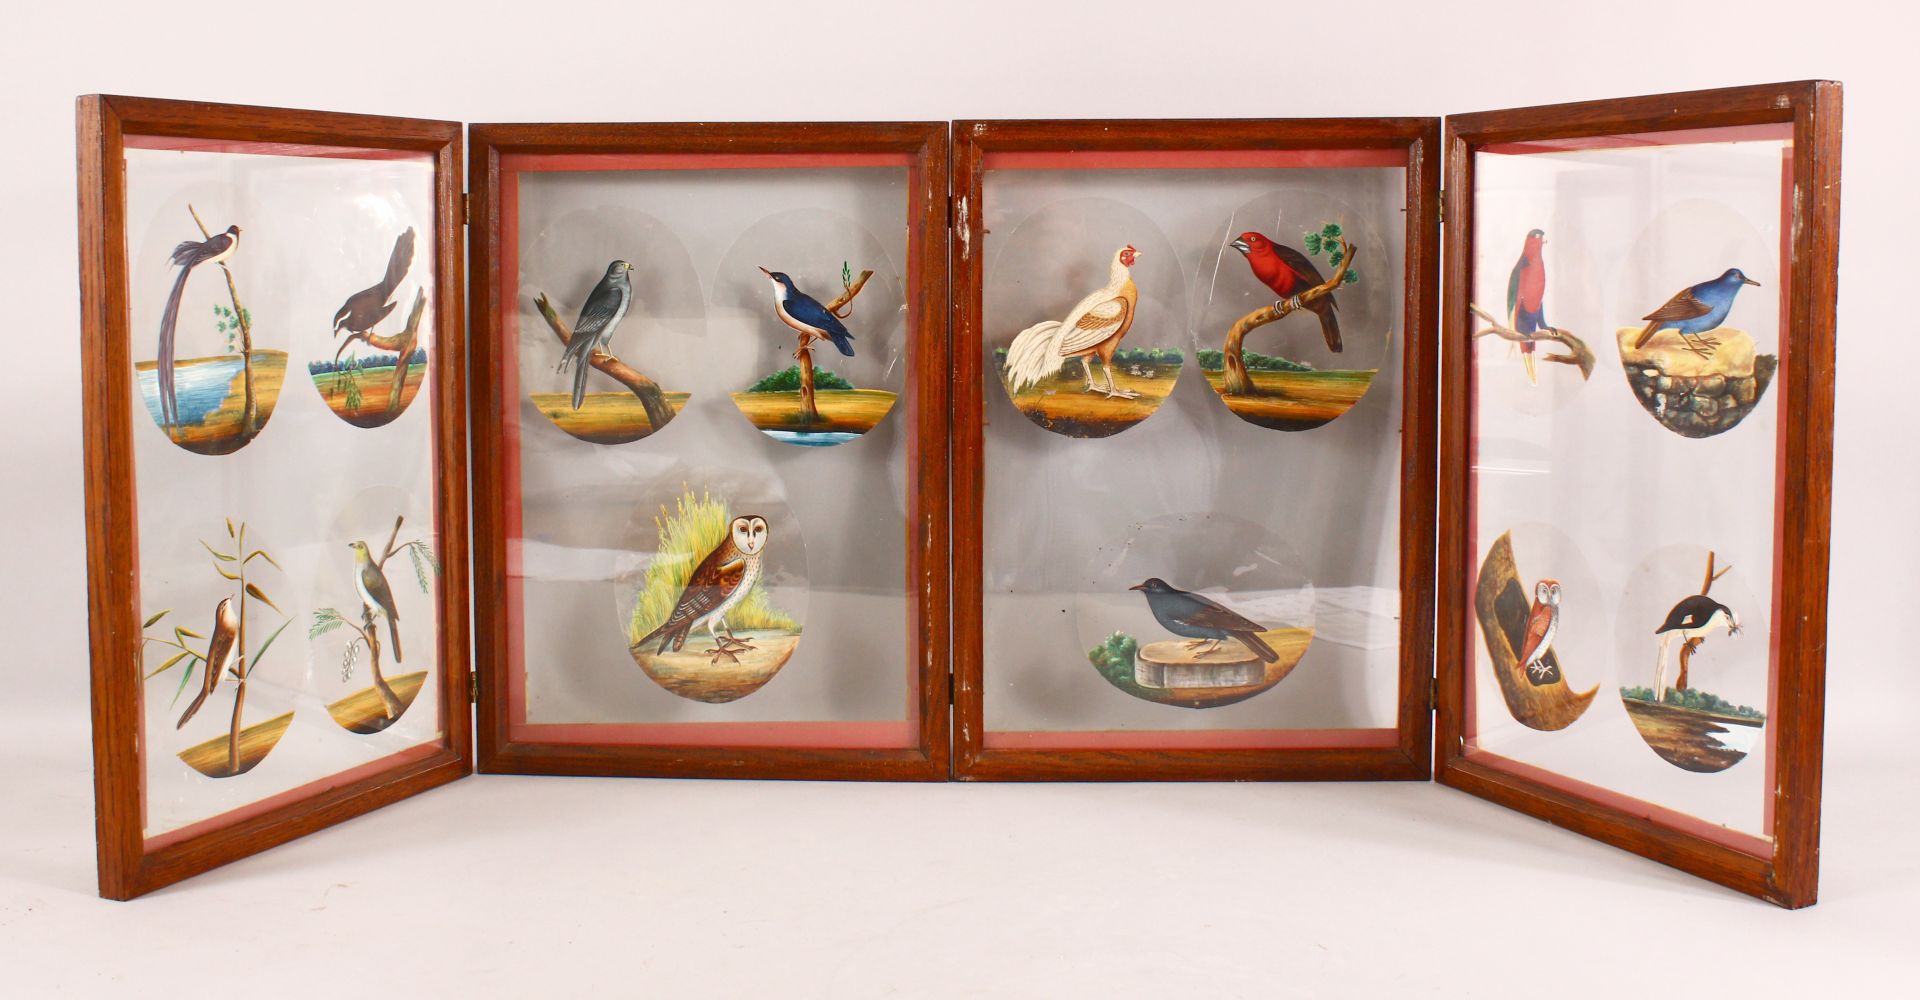 A FINE FRAMED FOUR PANEL SET OF 19TH CENTURY INDIAN SCHOOL PAINTINGS OF BIRDS on mica, each framed